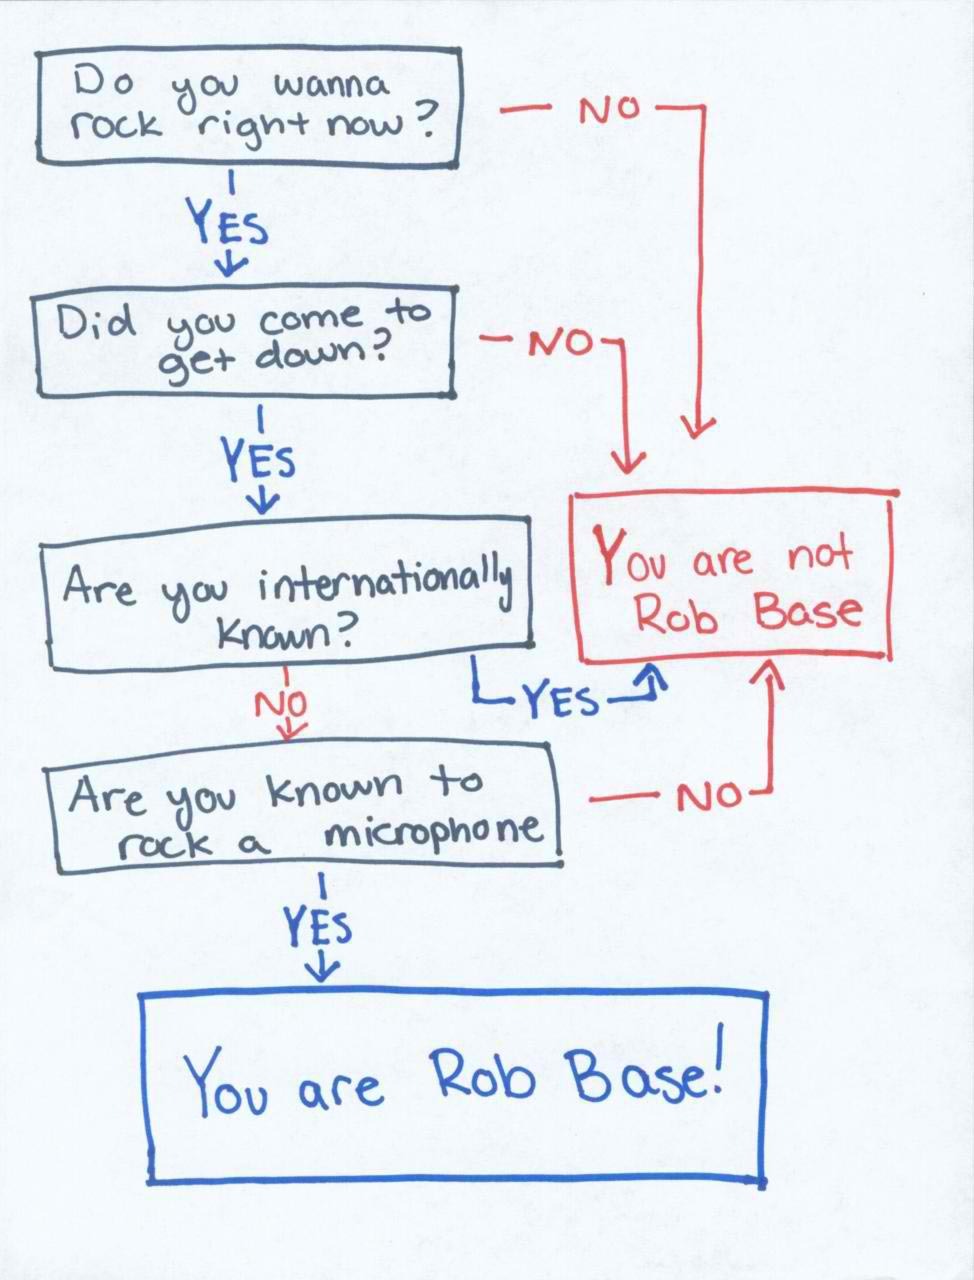 Are you Rob Base?